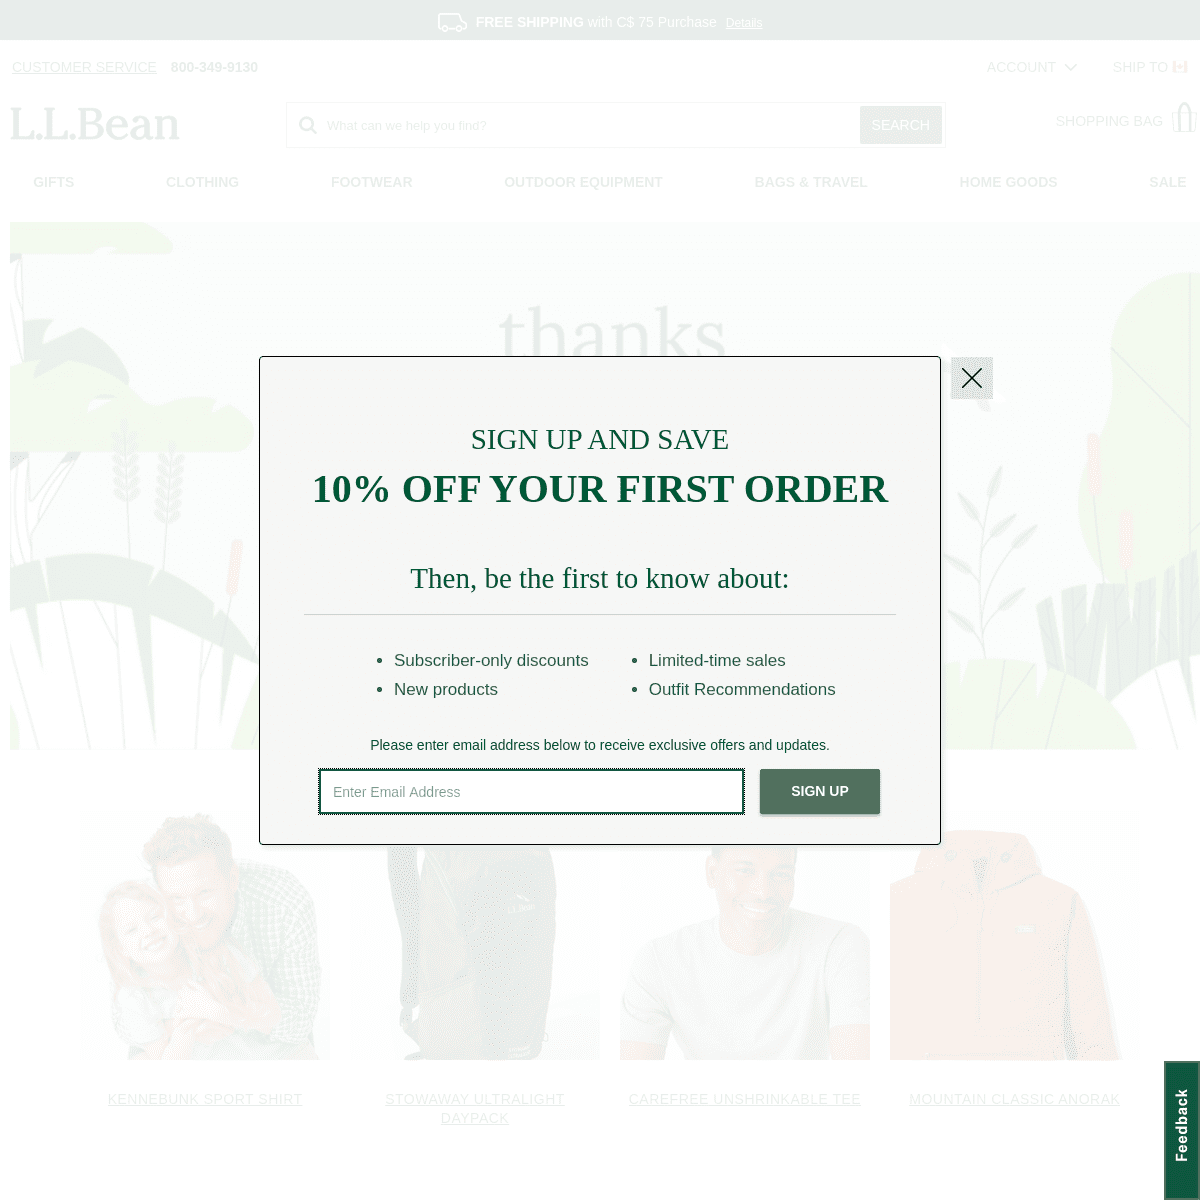 A complete backup of https://llbean.ca